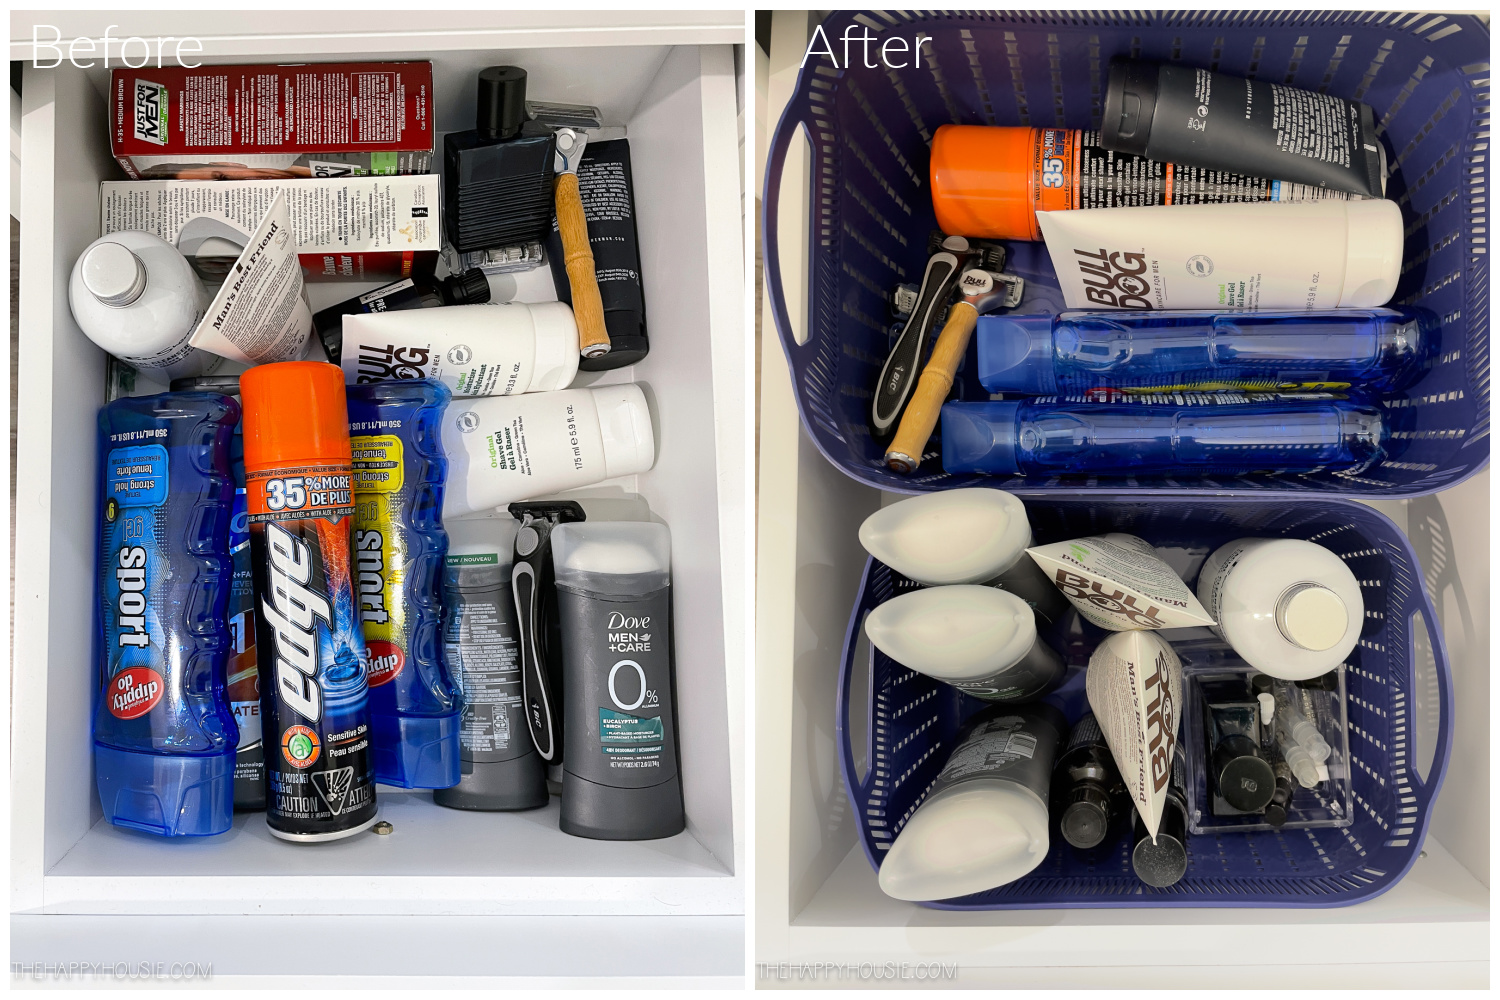 Before and after bathroom cabinet organization men's toiletries